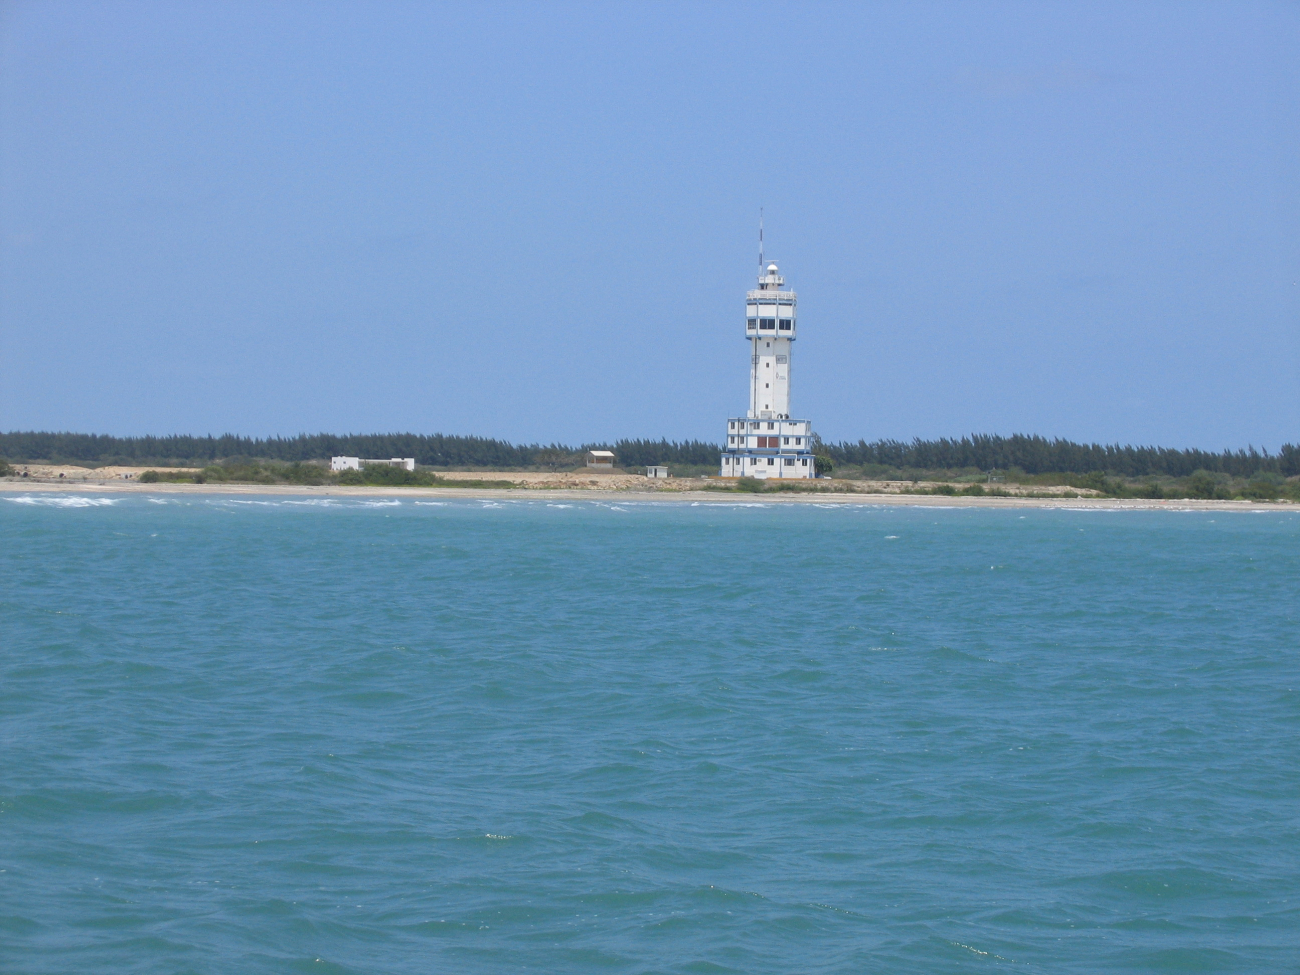 Altamira Lighthouse at entrance to Tampico Harbor